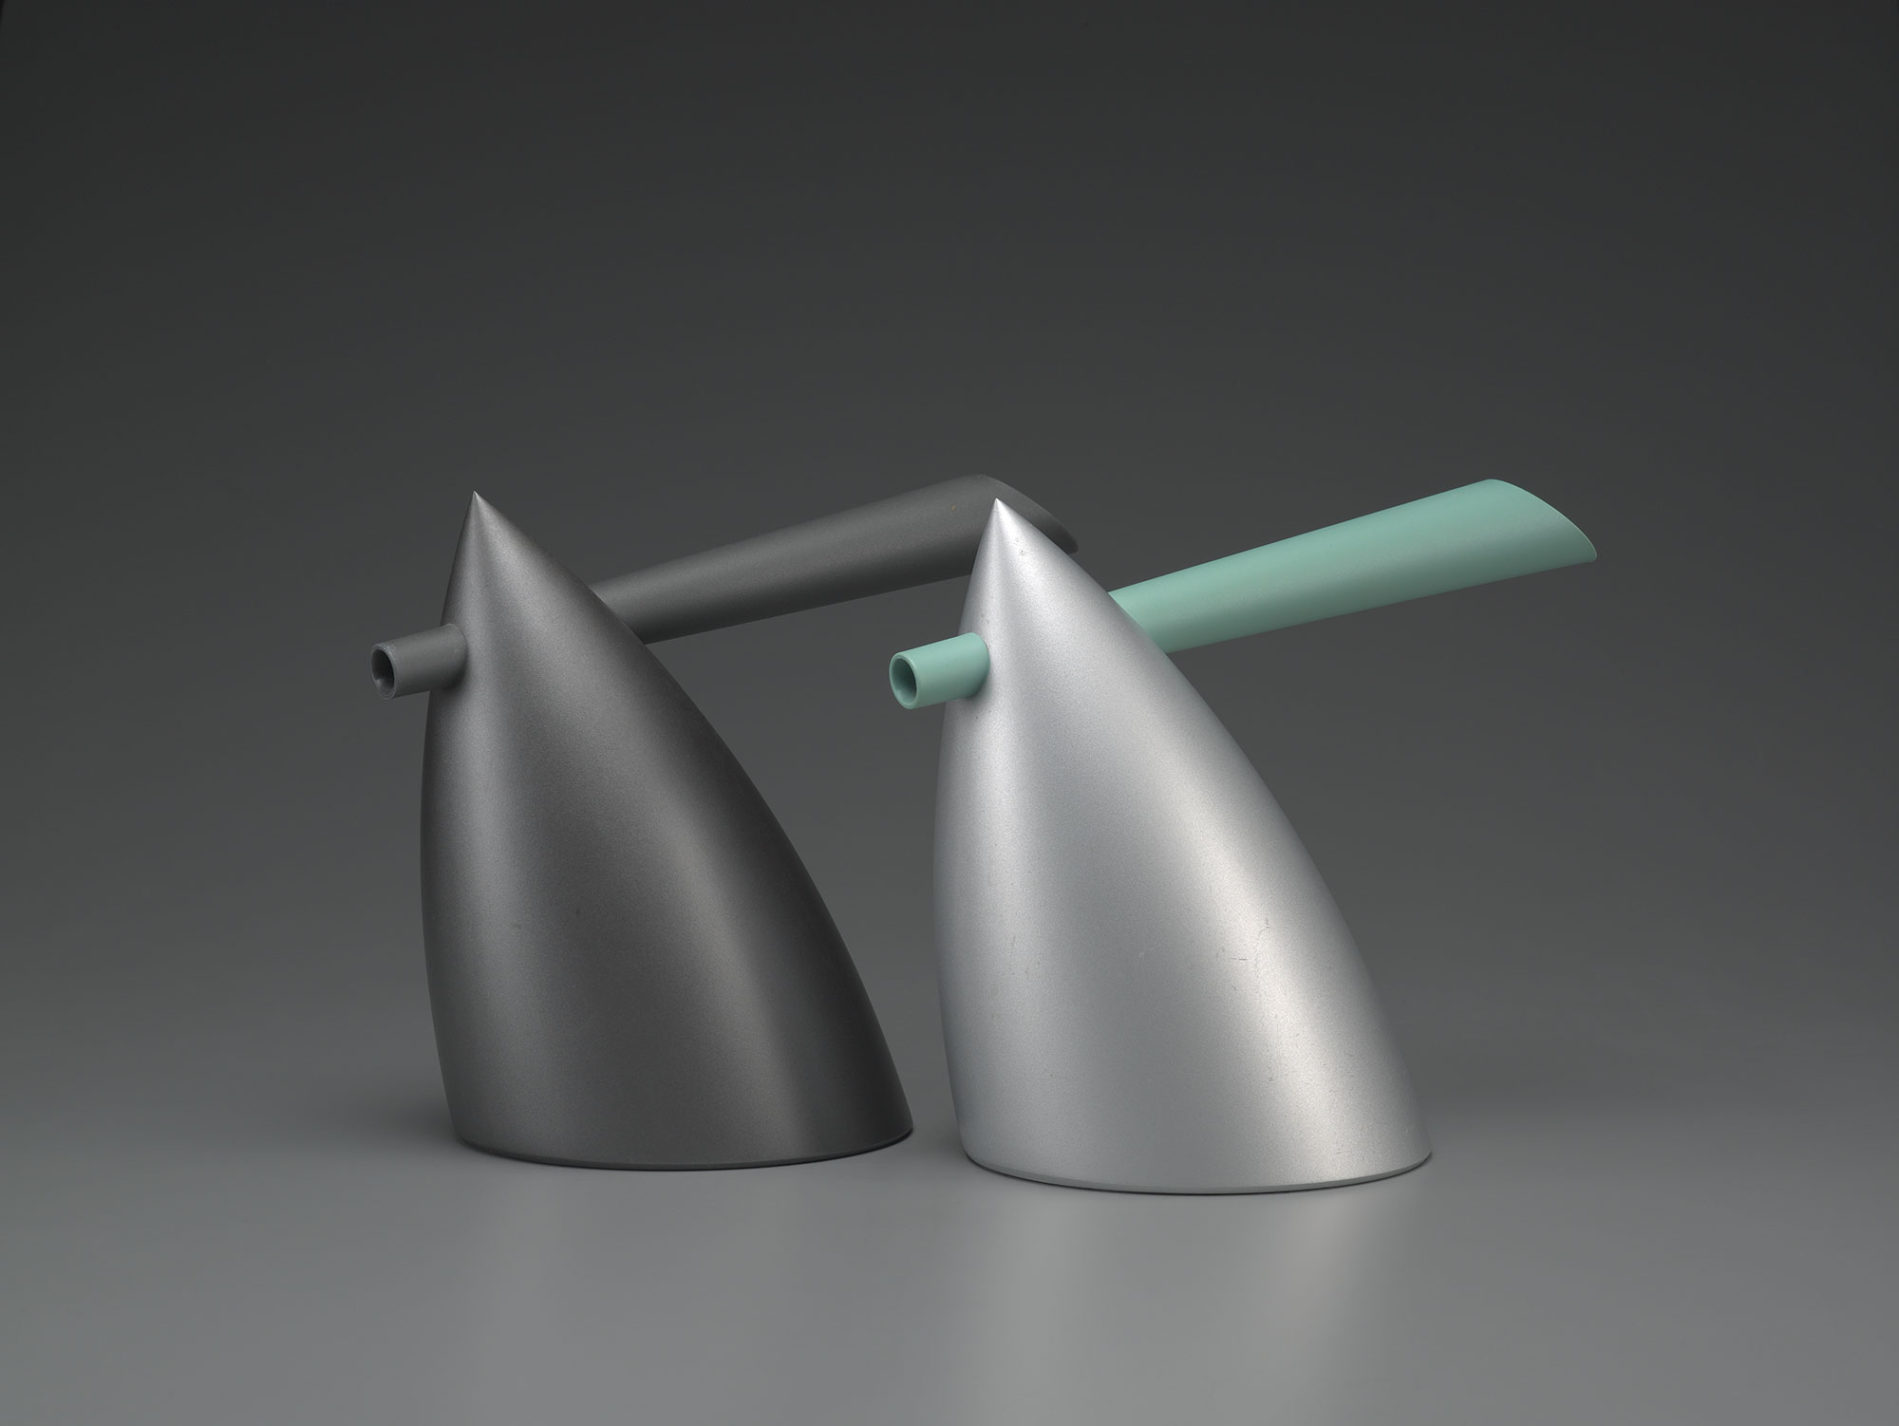 Two bullet-shaped kettles with a combined spout and handle that goes through the point at the top. One is all dark grey, the other is light gray with a pale blue-green spout/handle.